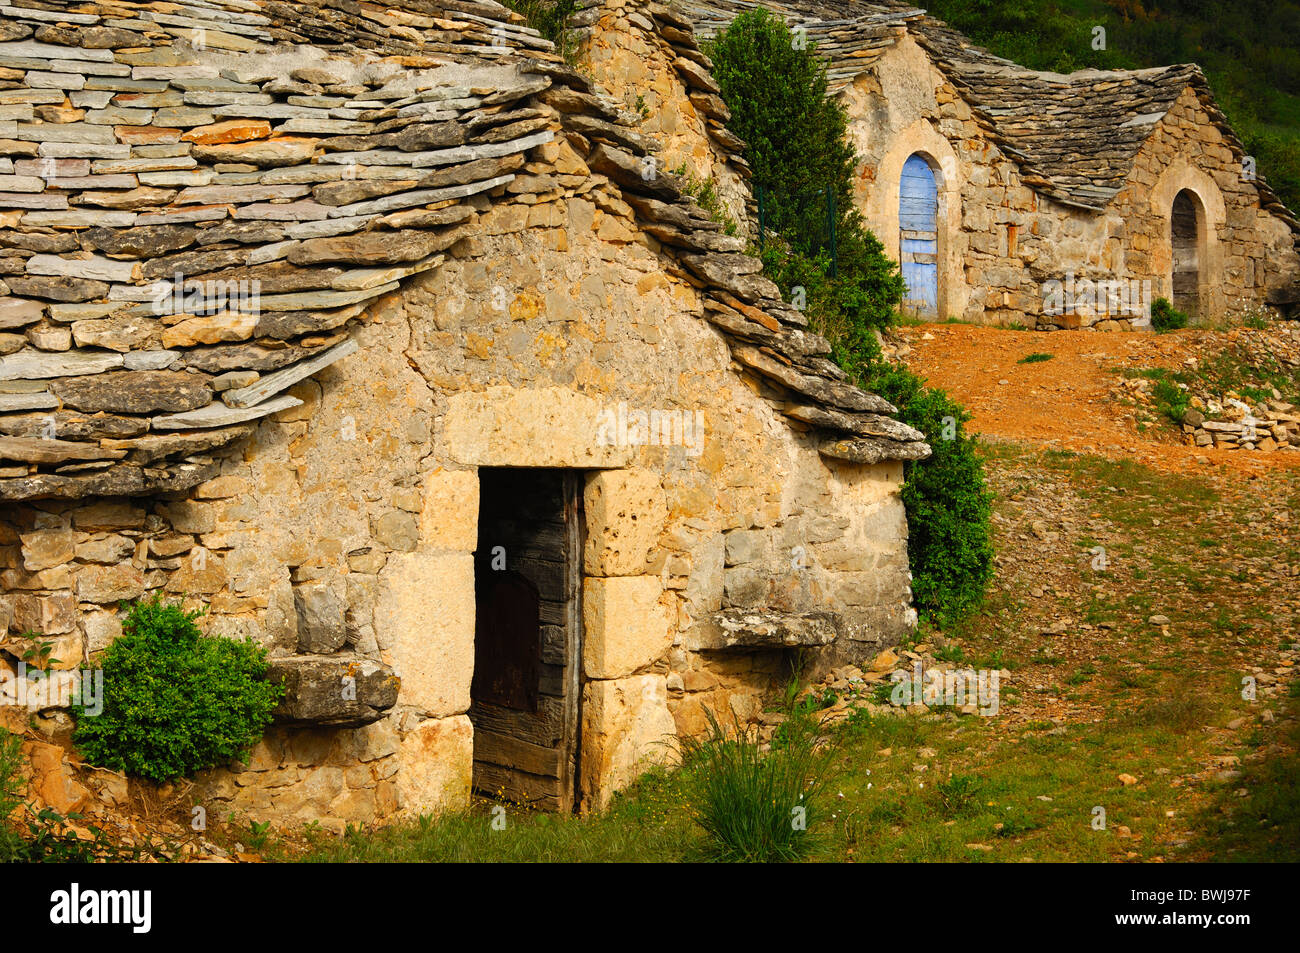 Abandoned semi troglodyte wine cellars with a natural stone roof in Entre-deux-Monts near Riviere-sur-Tarn, Aveyron, France Stock Photo